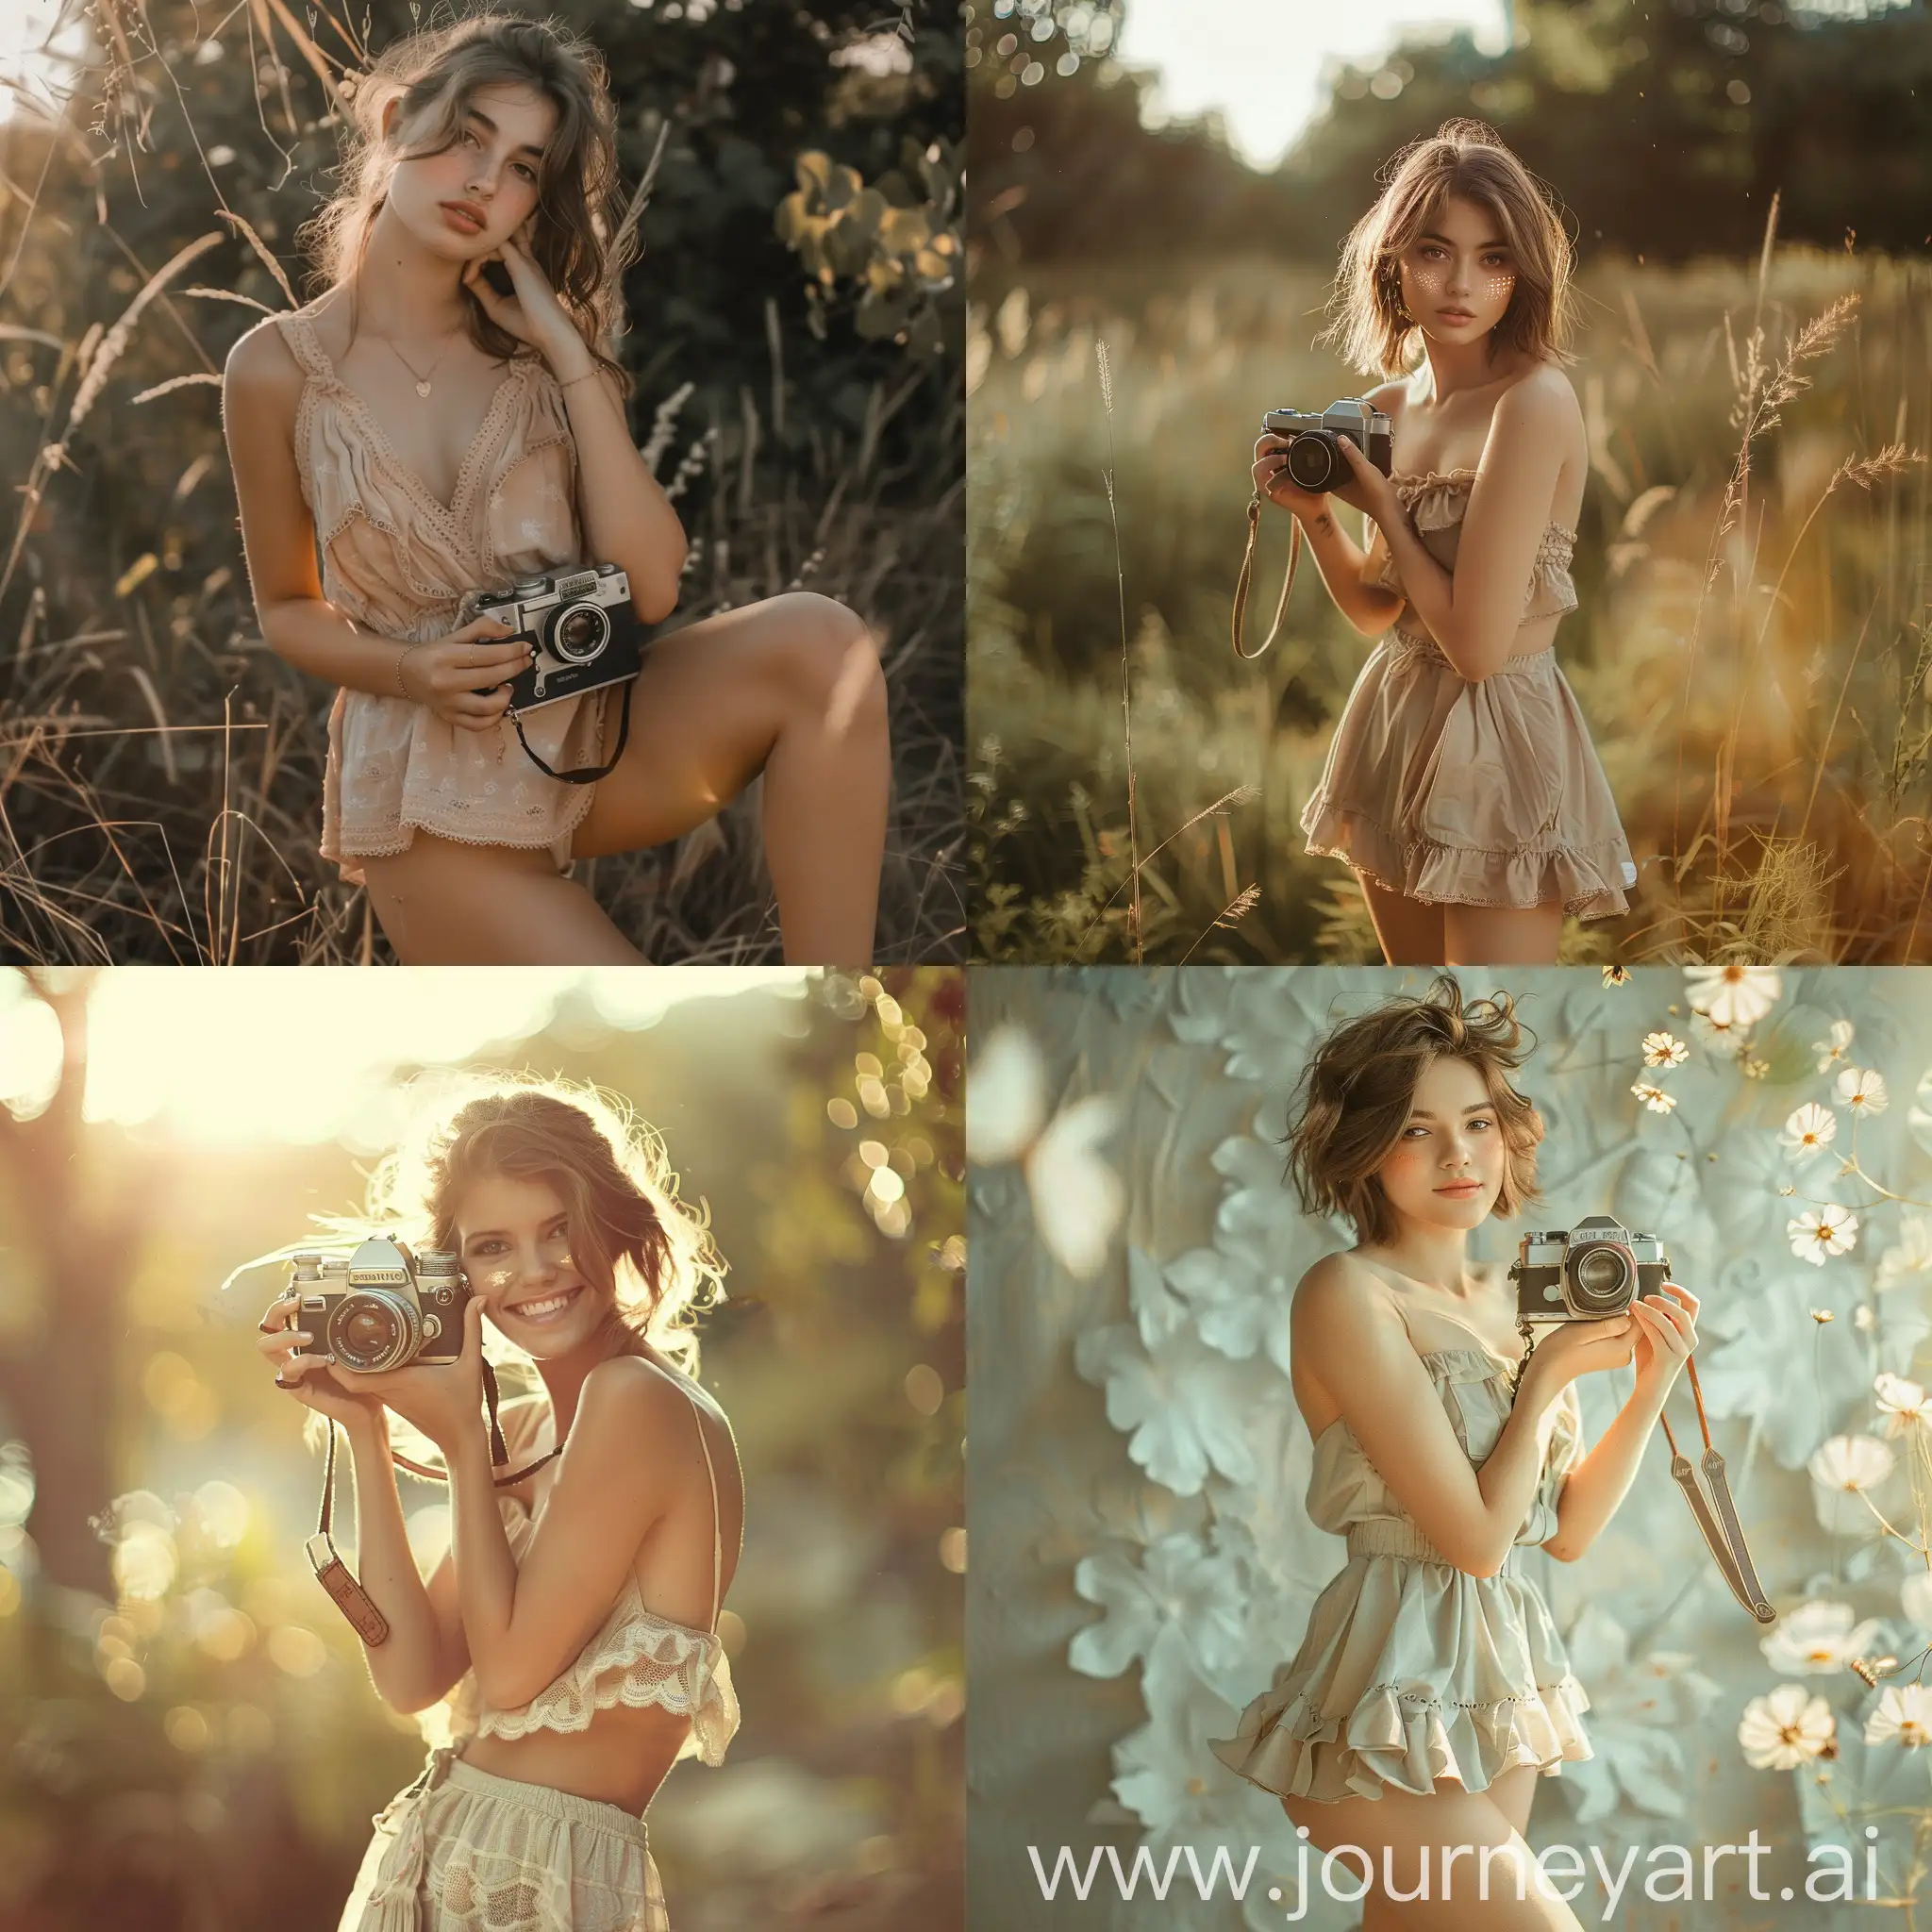 SunKissed-Girl-Posing-with-Camera-in-Short-Frock